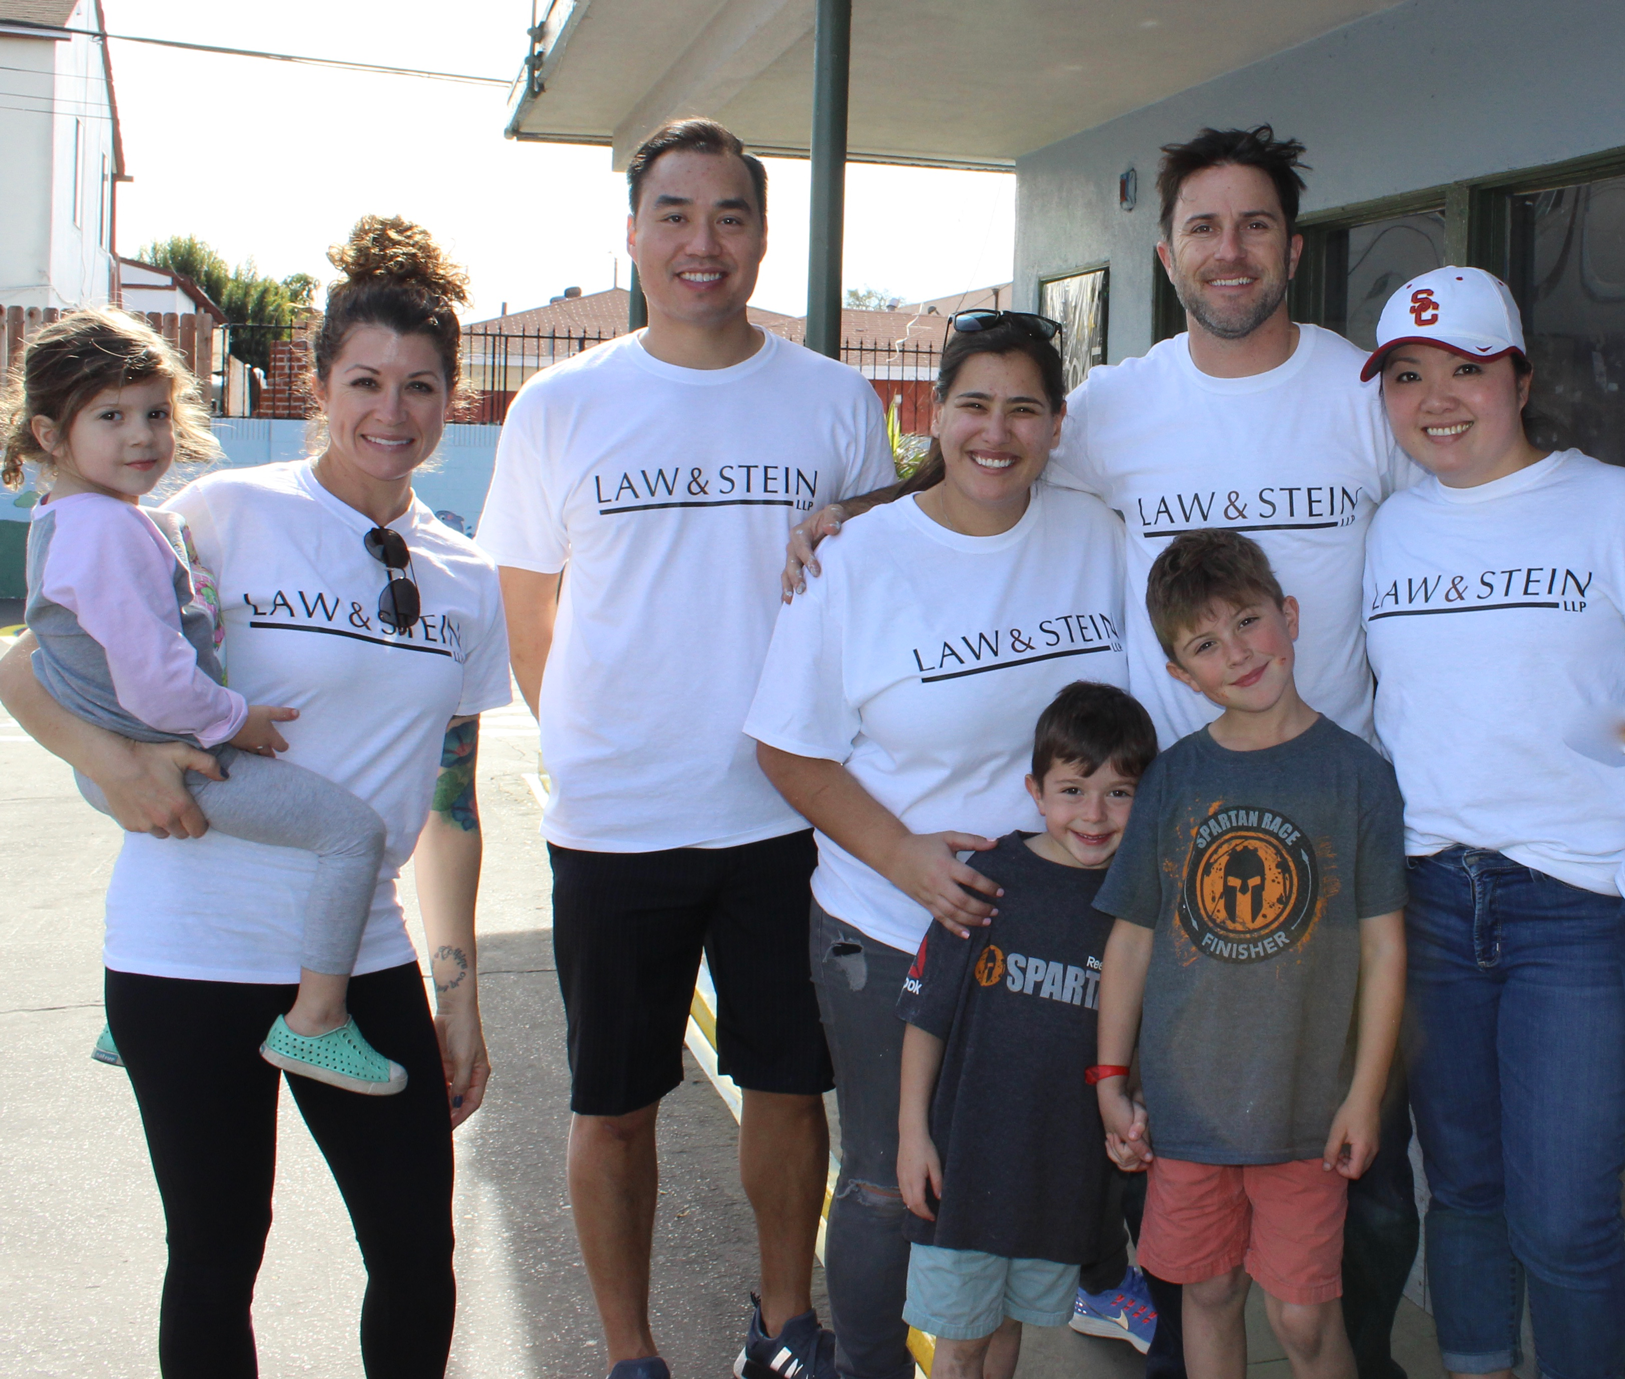 Law & Stein Employees and Family Volunteering at LAMP